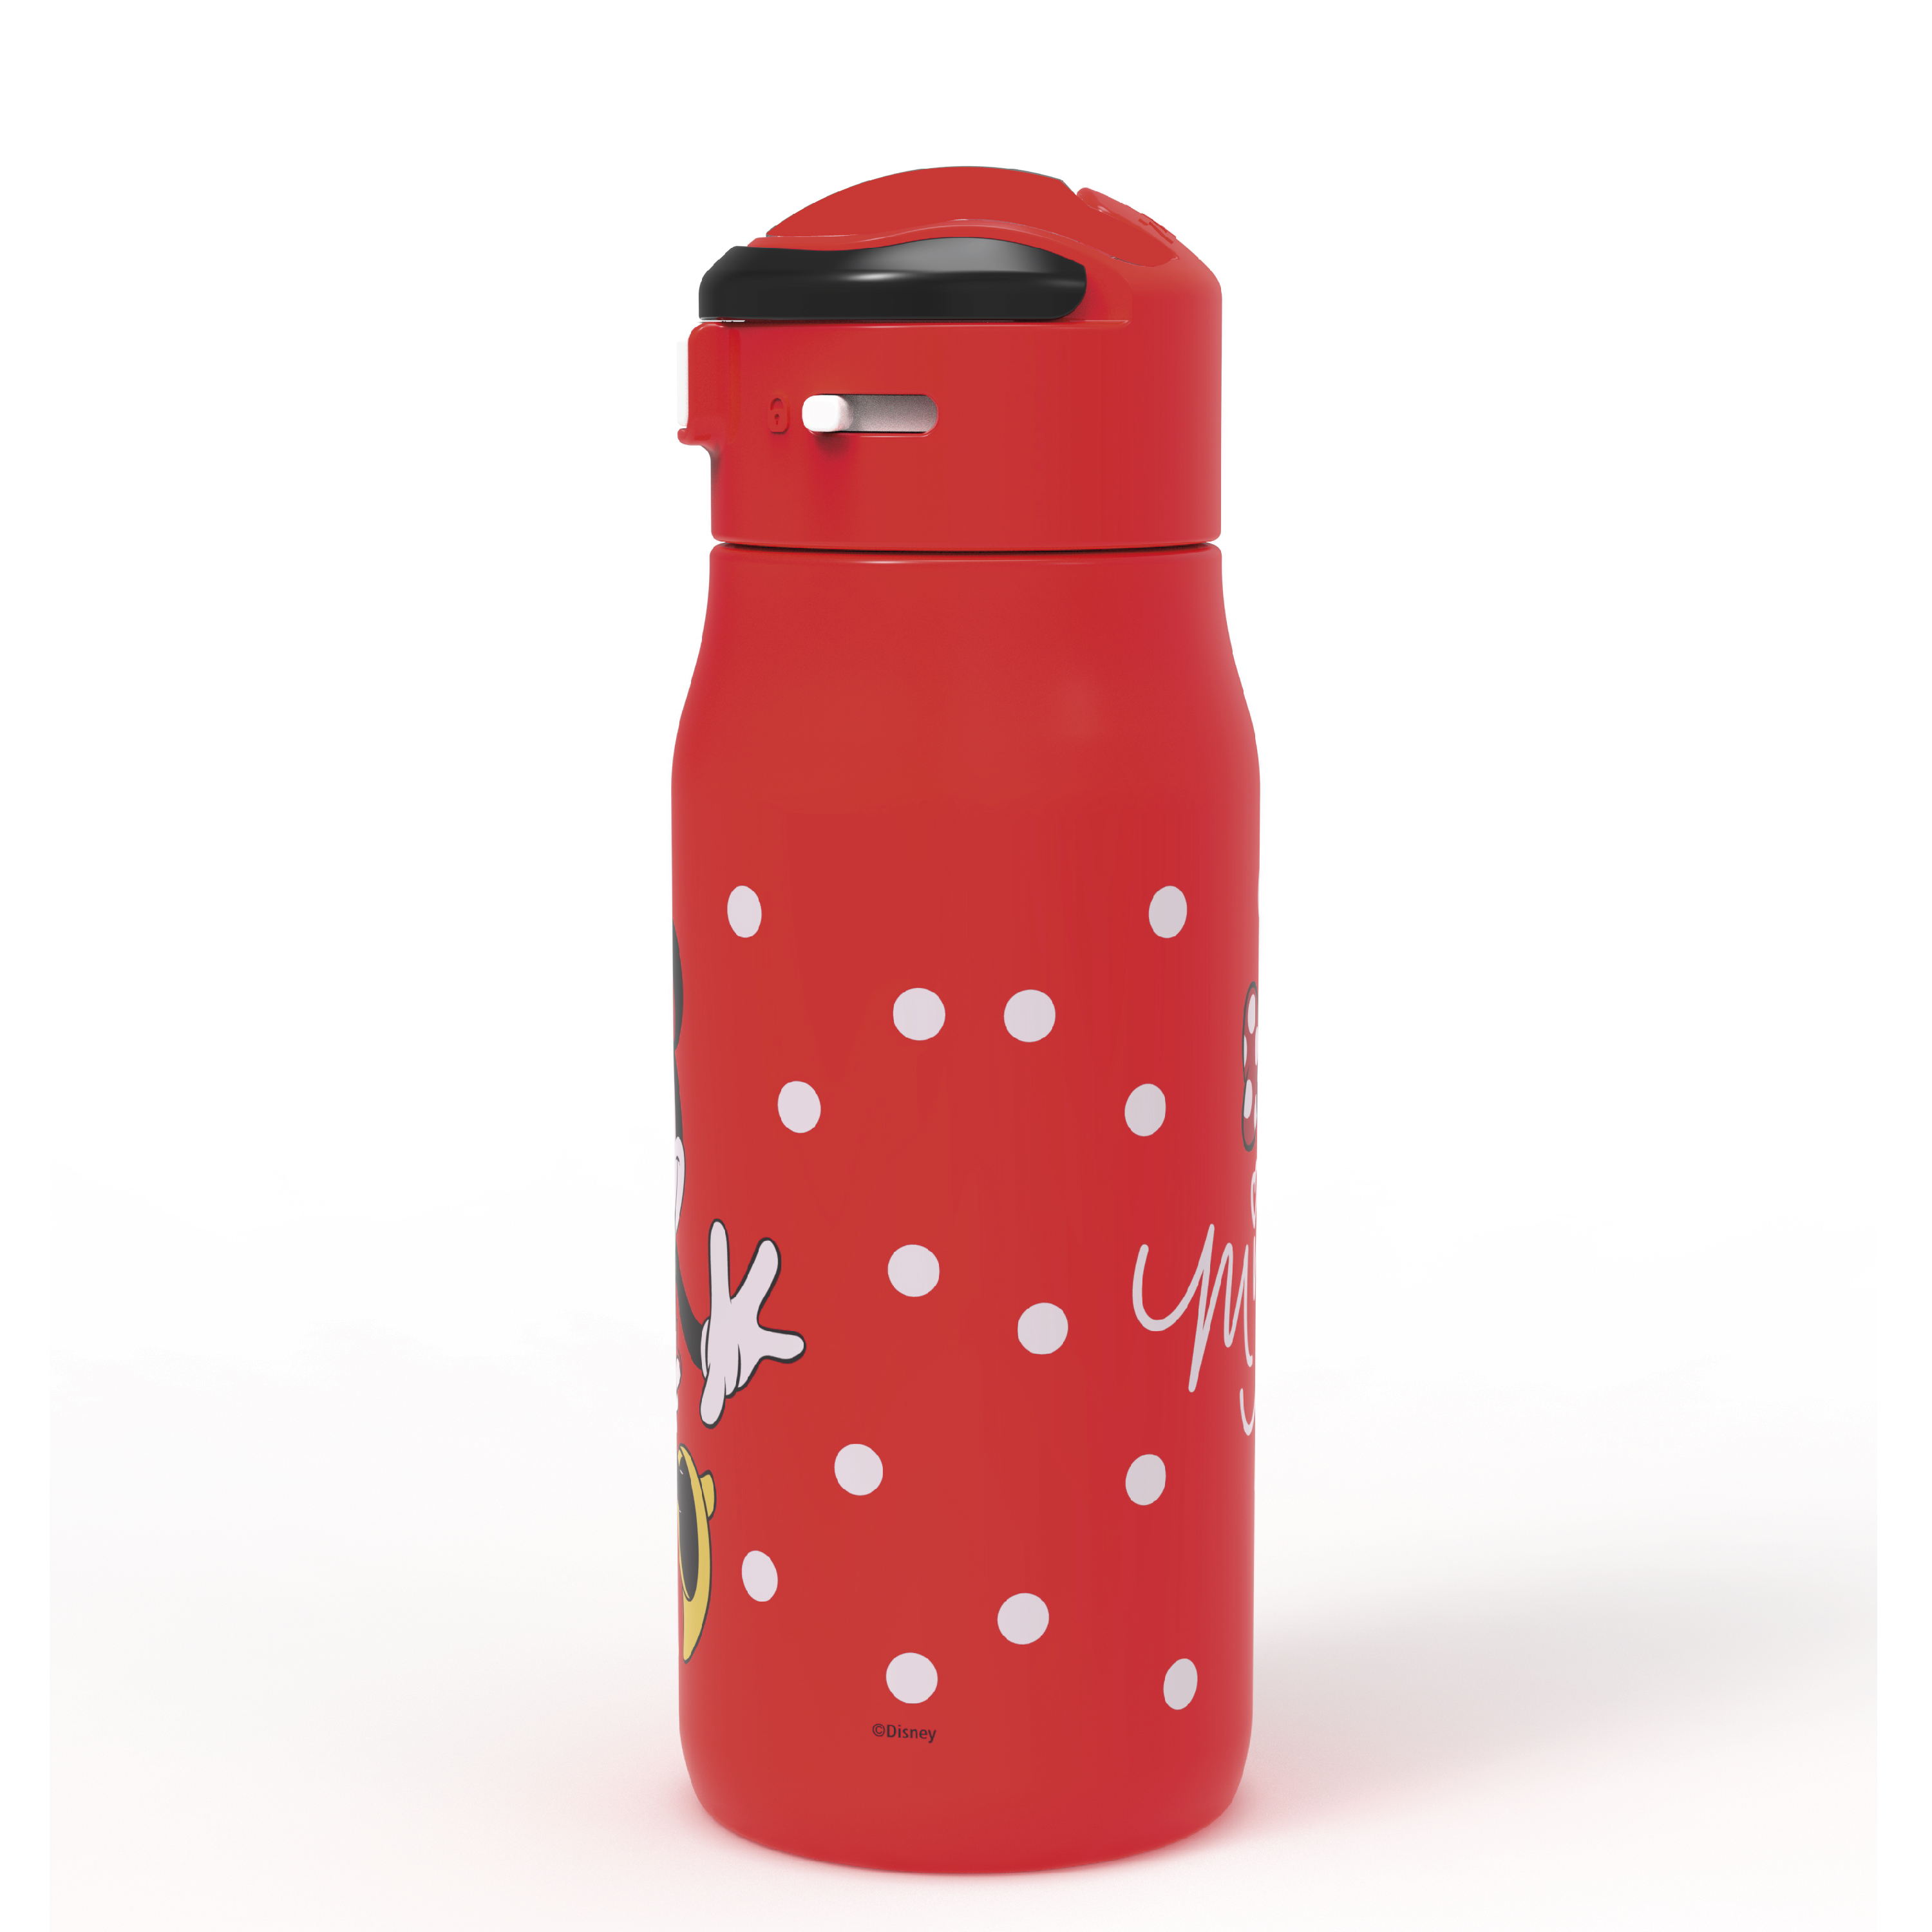 Disney 13.5 ounce Mesa Double Wall Insulated Stainless Steel Water Bottle, Minnie Mouse slideshow image 3